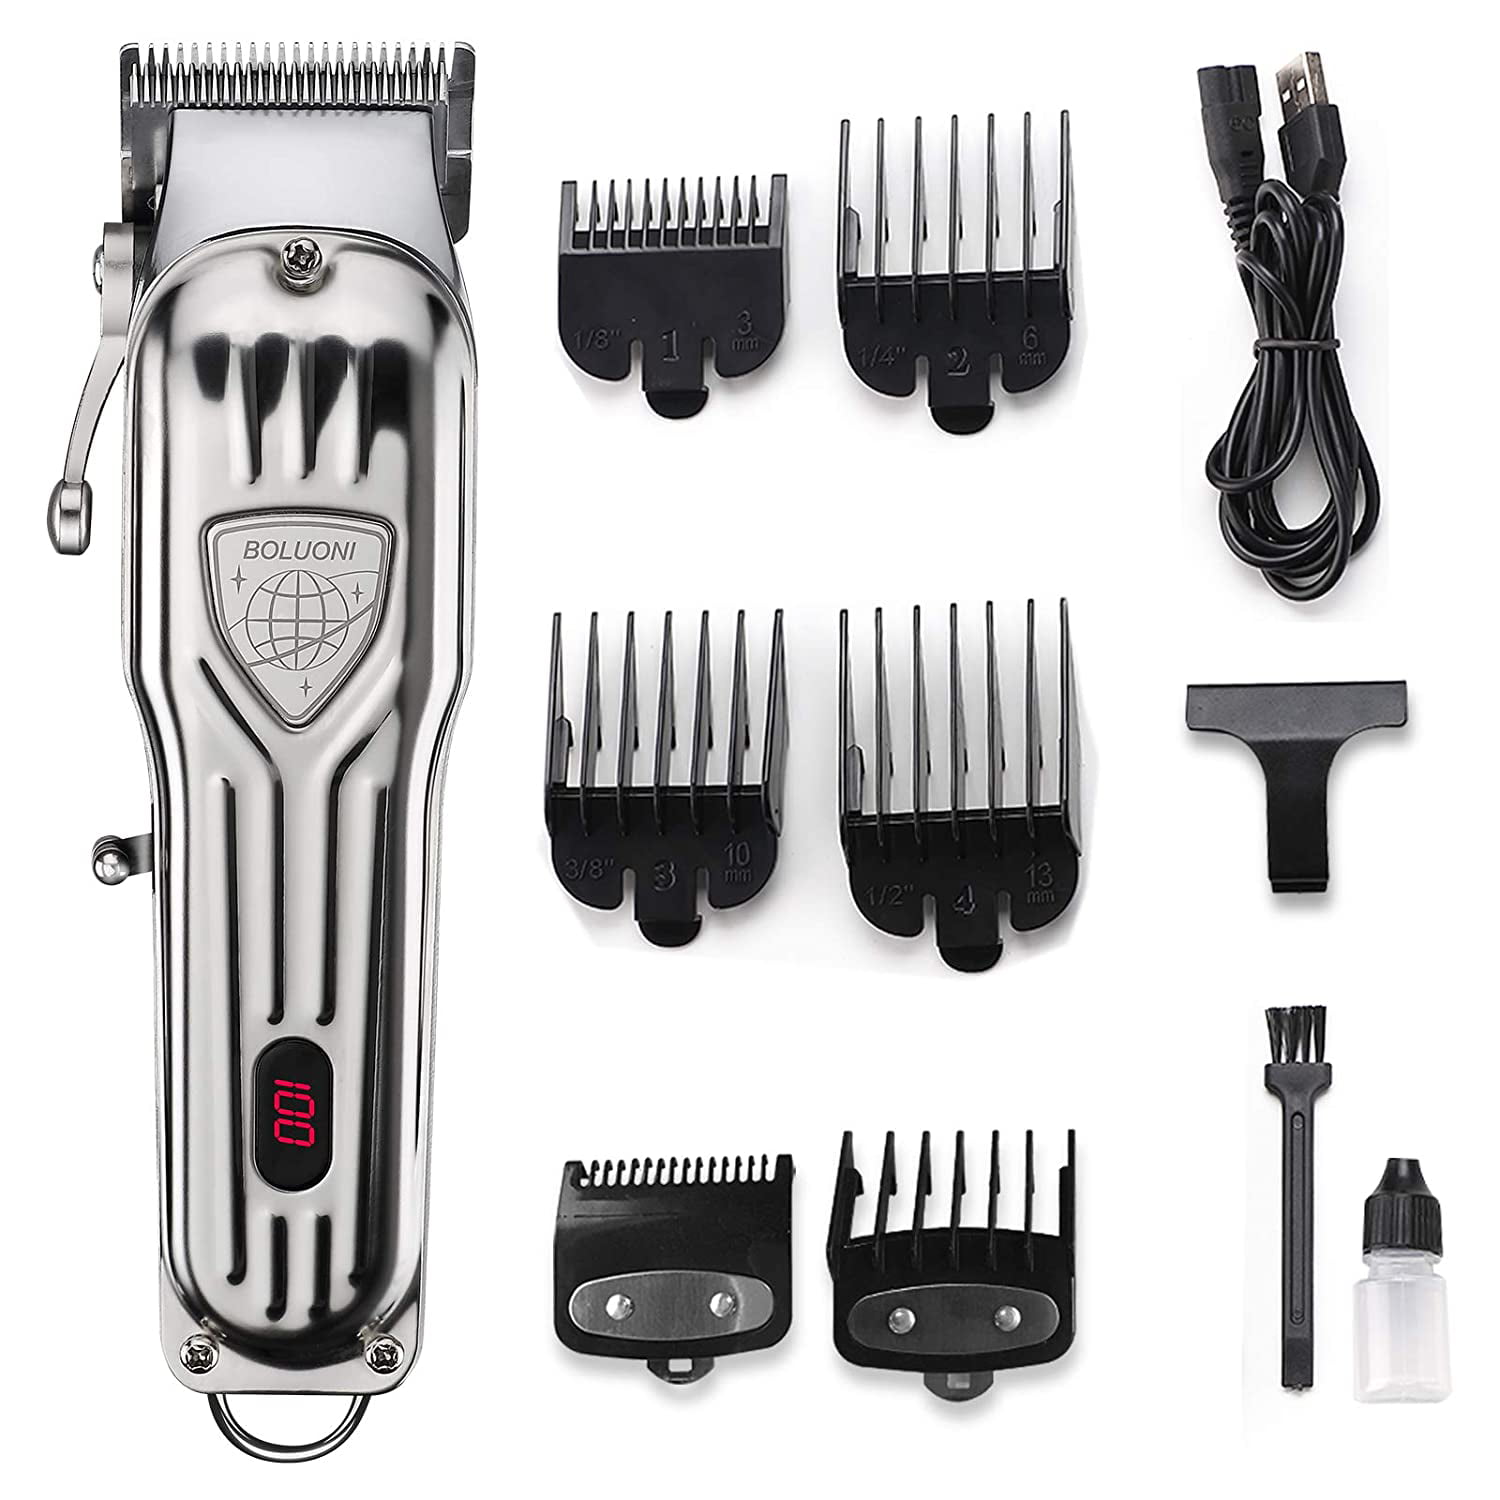 Eccomum Electric Hair Clippers For Men, BOLUONI Cordless Hair Trimmer  Barber For Hair Cutting Kit Rechargeable, LED Display 